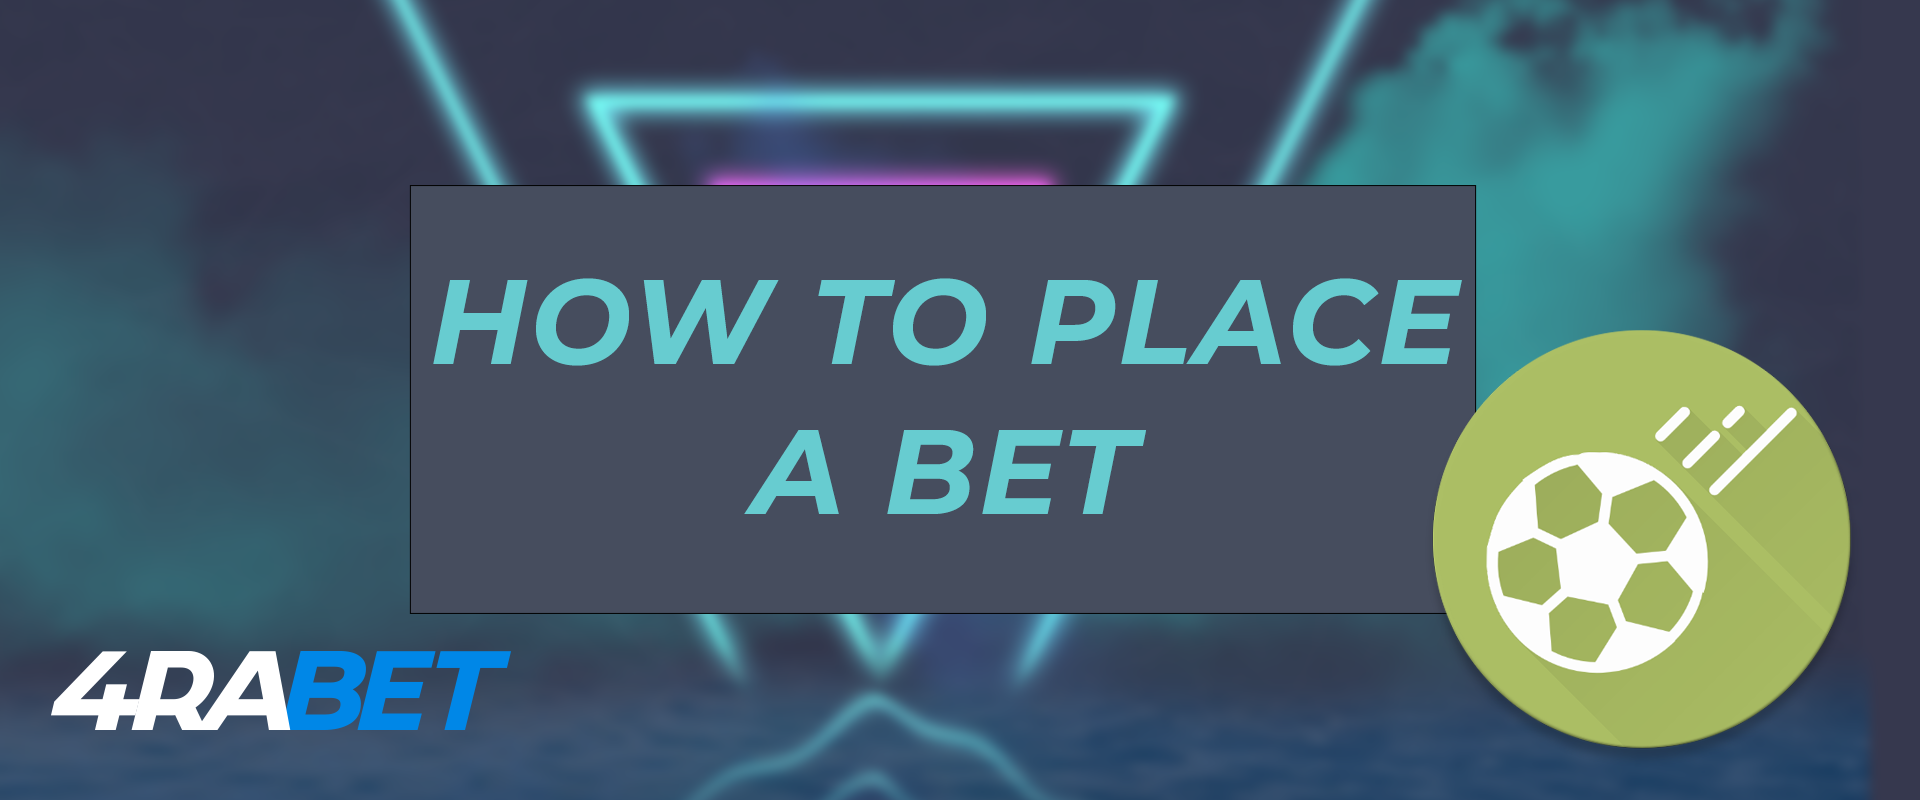 How to place a bet on football on the 4rabet.